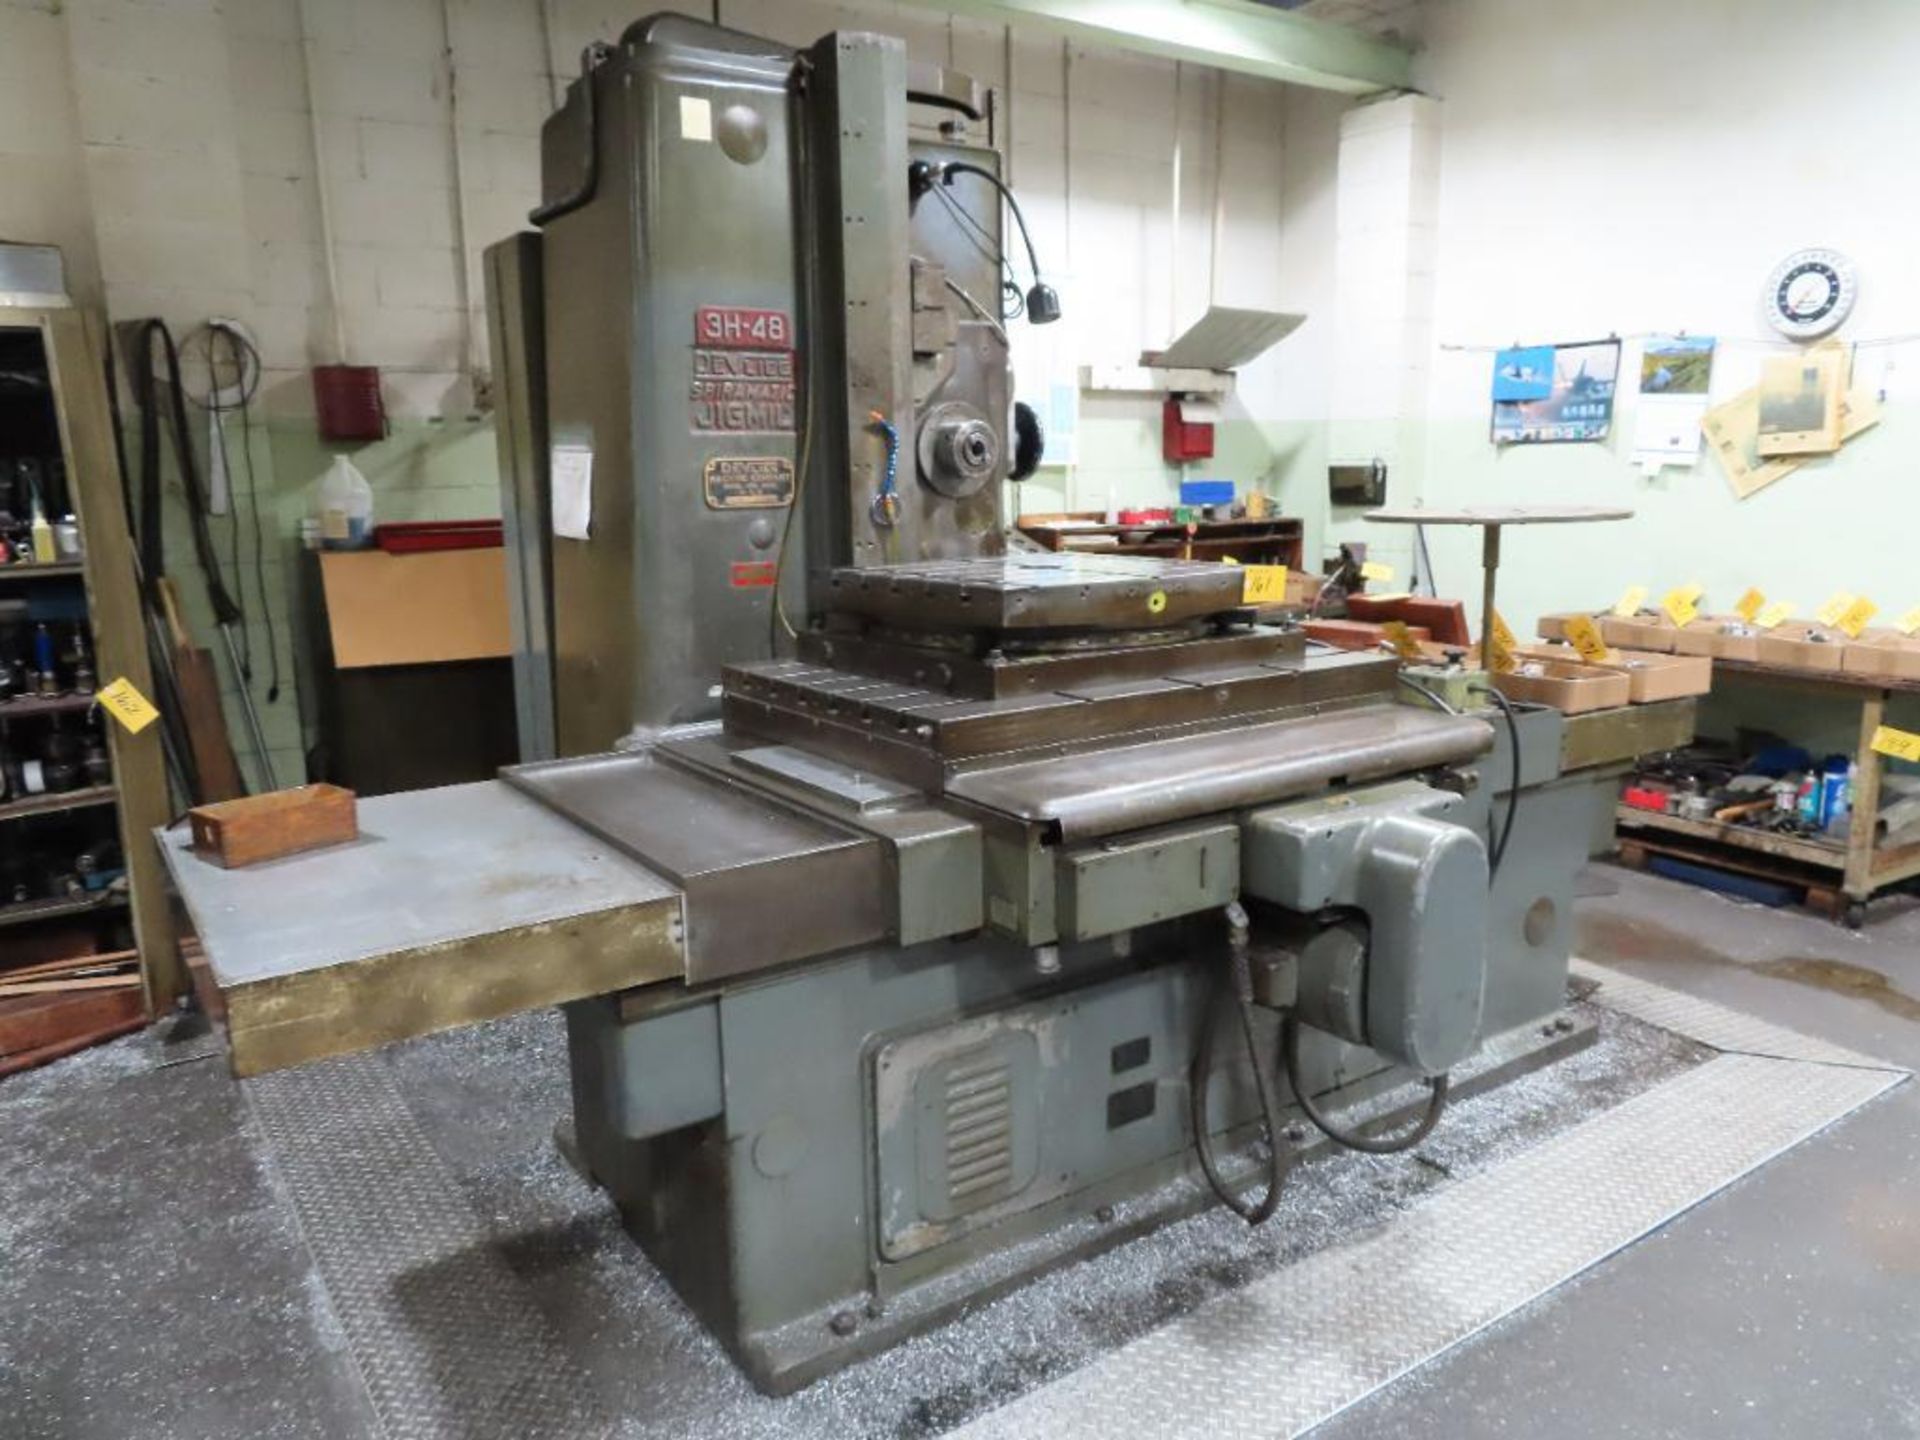 Devlieg Mdl.3-H-48 Spiramatic Jigmil, 35" X 48" Table, 16-Spindle Speeds 25-1200 RPM, 36" Vertical H - Image 2 of 6